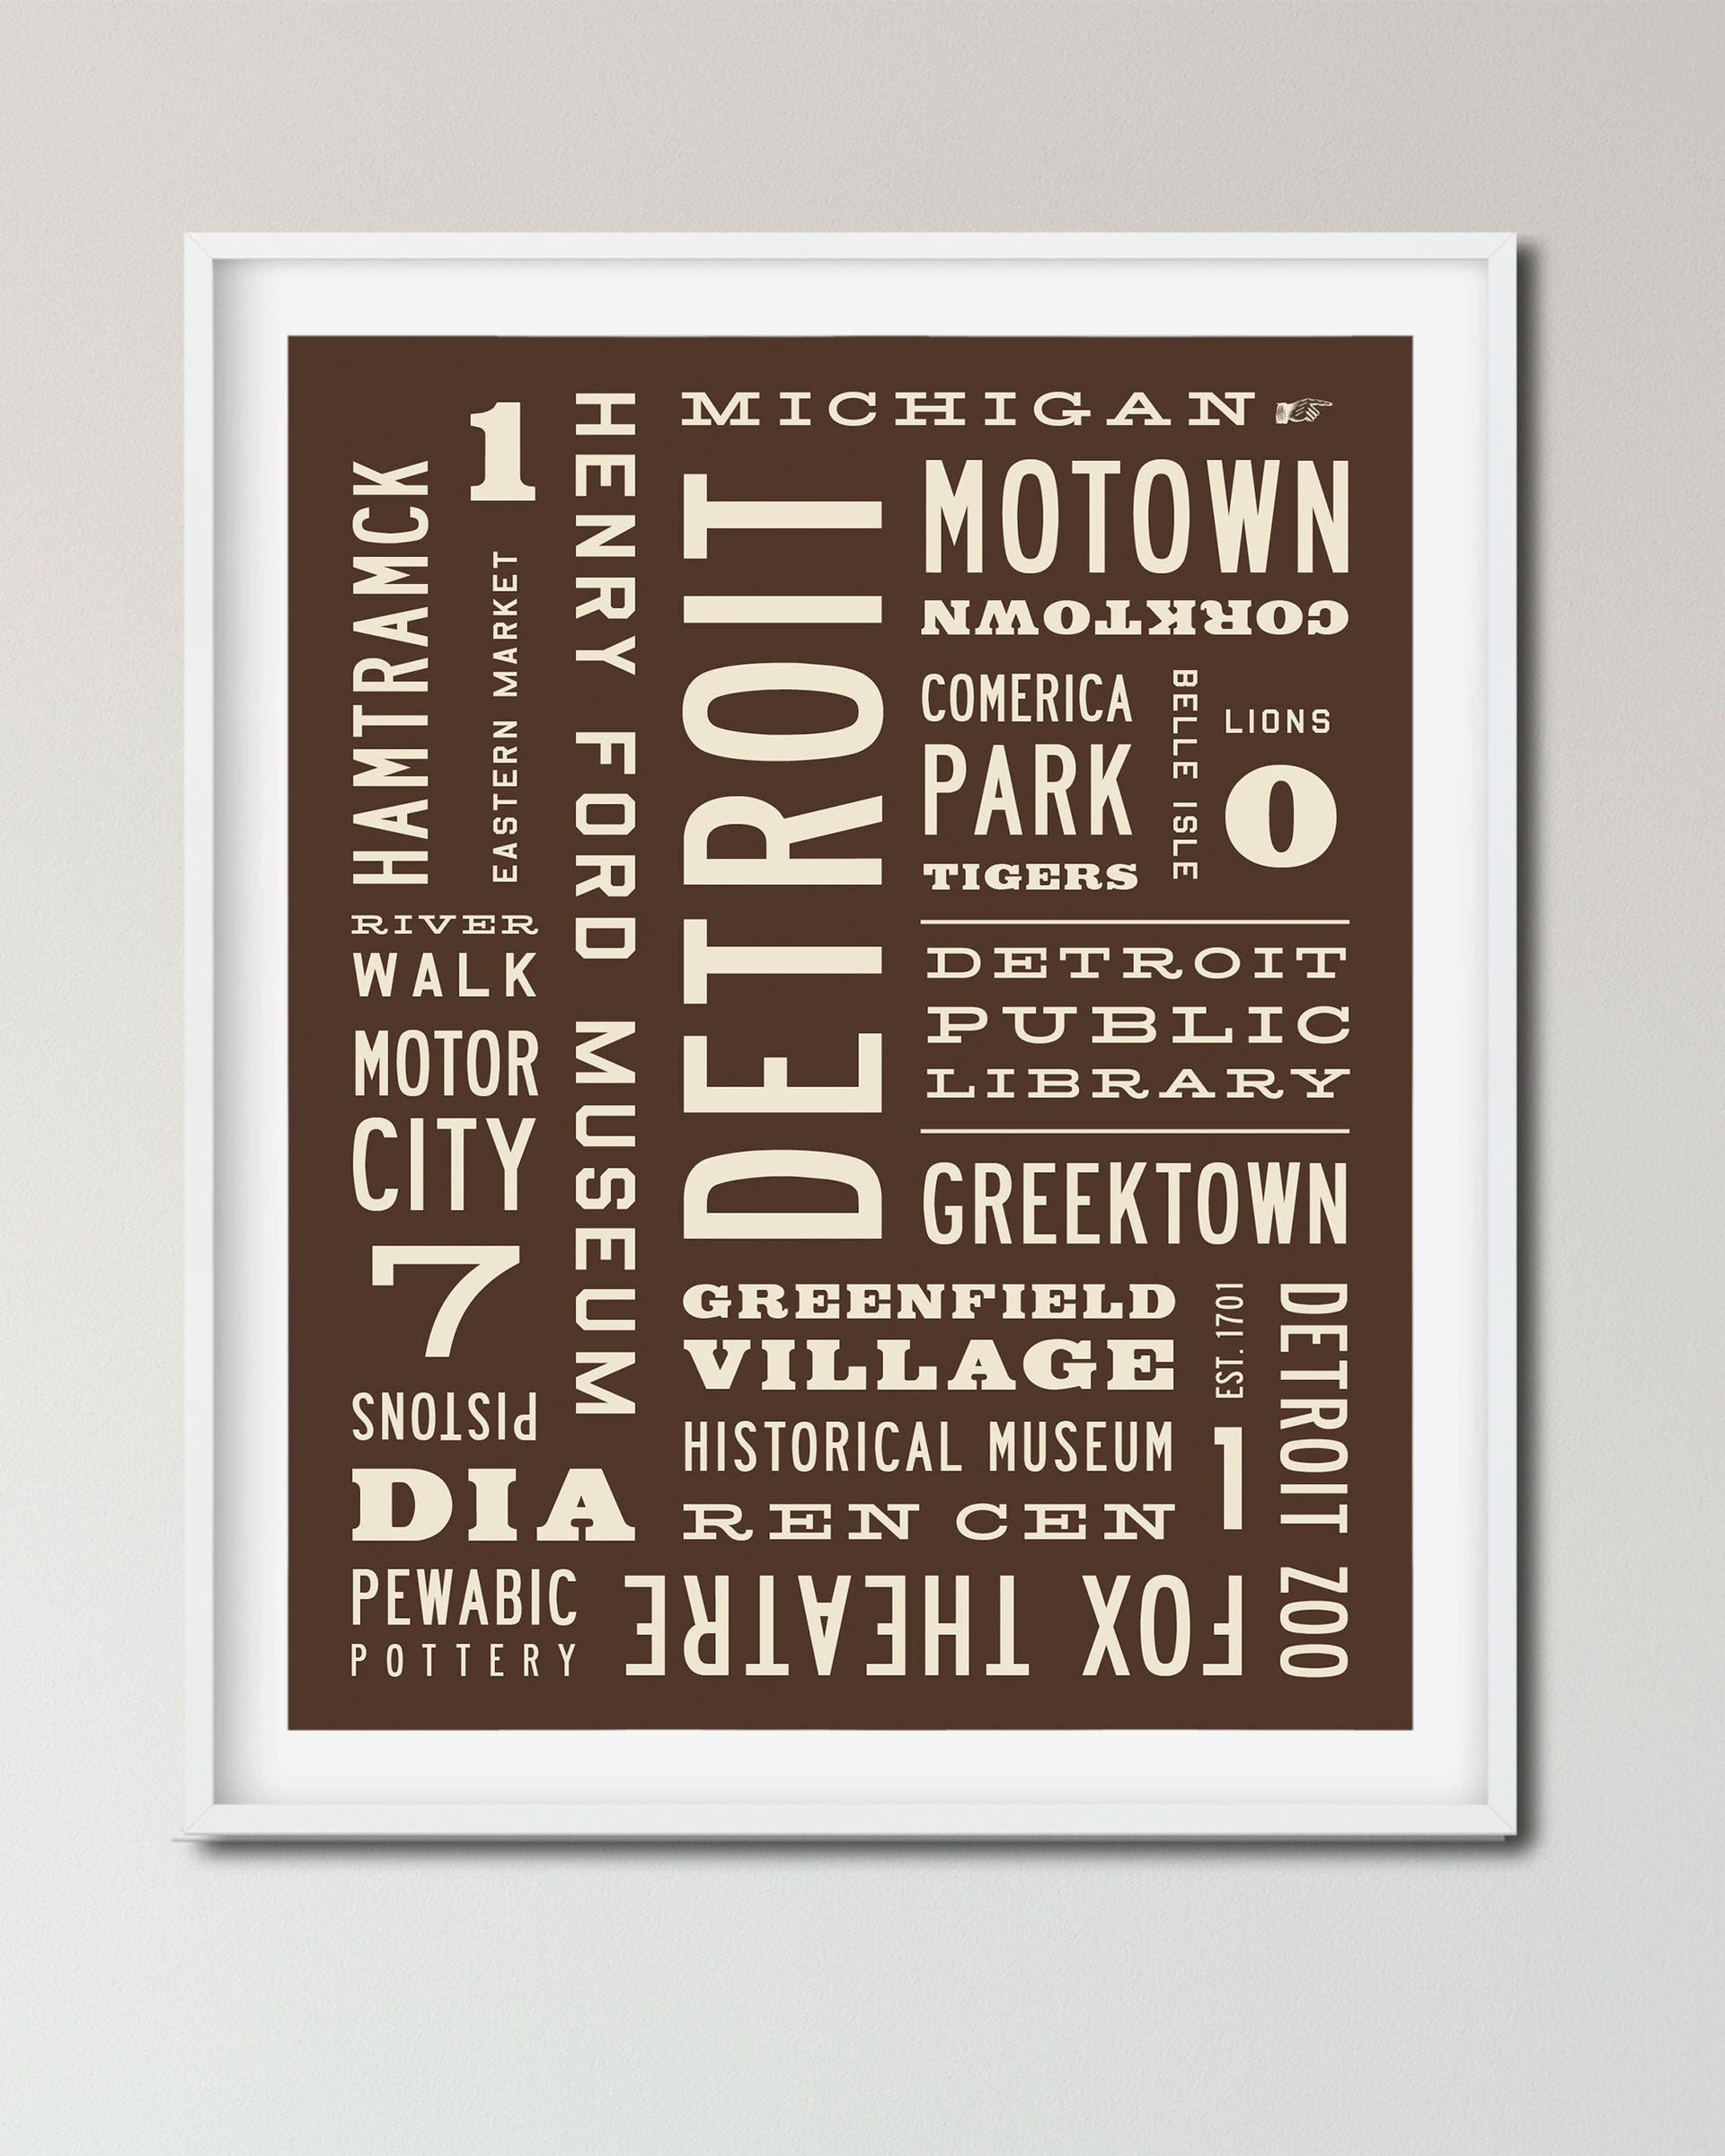 DETROIT Word Art Poster Board 11x14, 16x20, 20x30 sizes - Michigan Sports,  Michigan, Photography, Fun Gifts, or For Home Decorating!